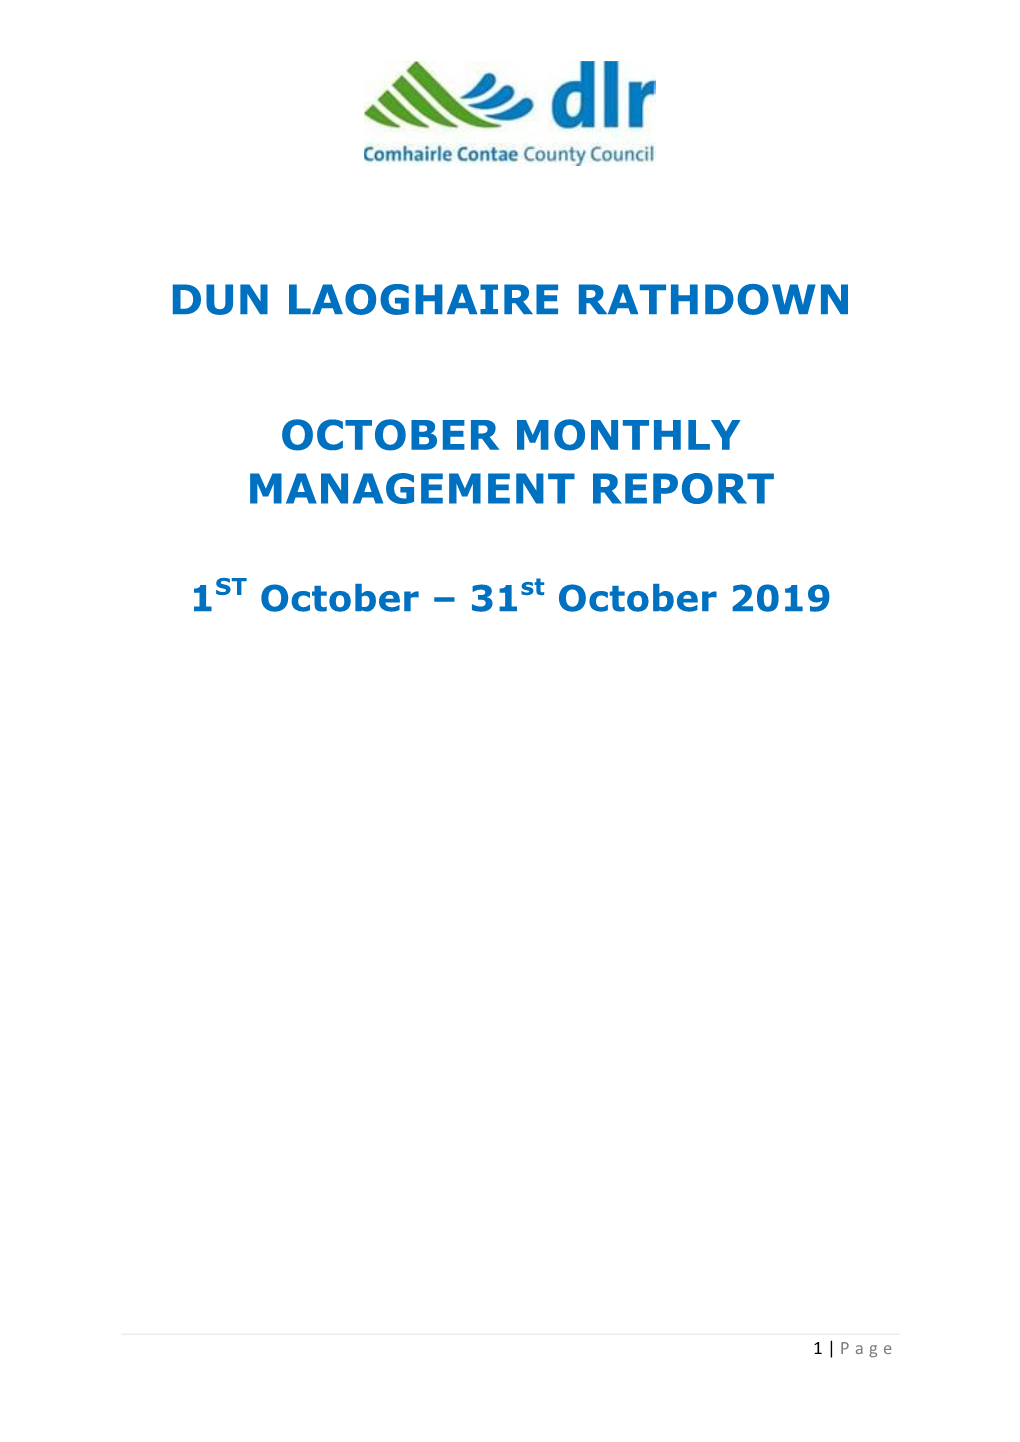 October 2019 Monthly Management Report